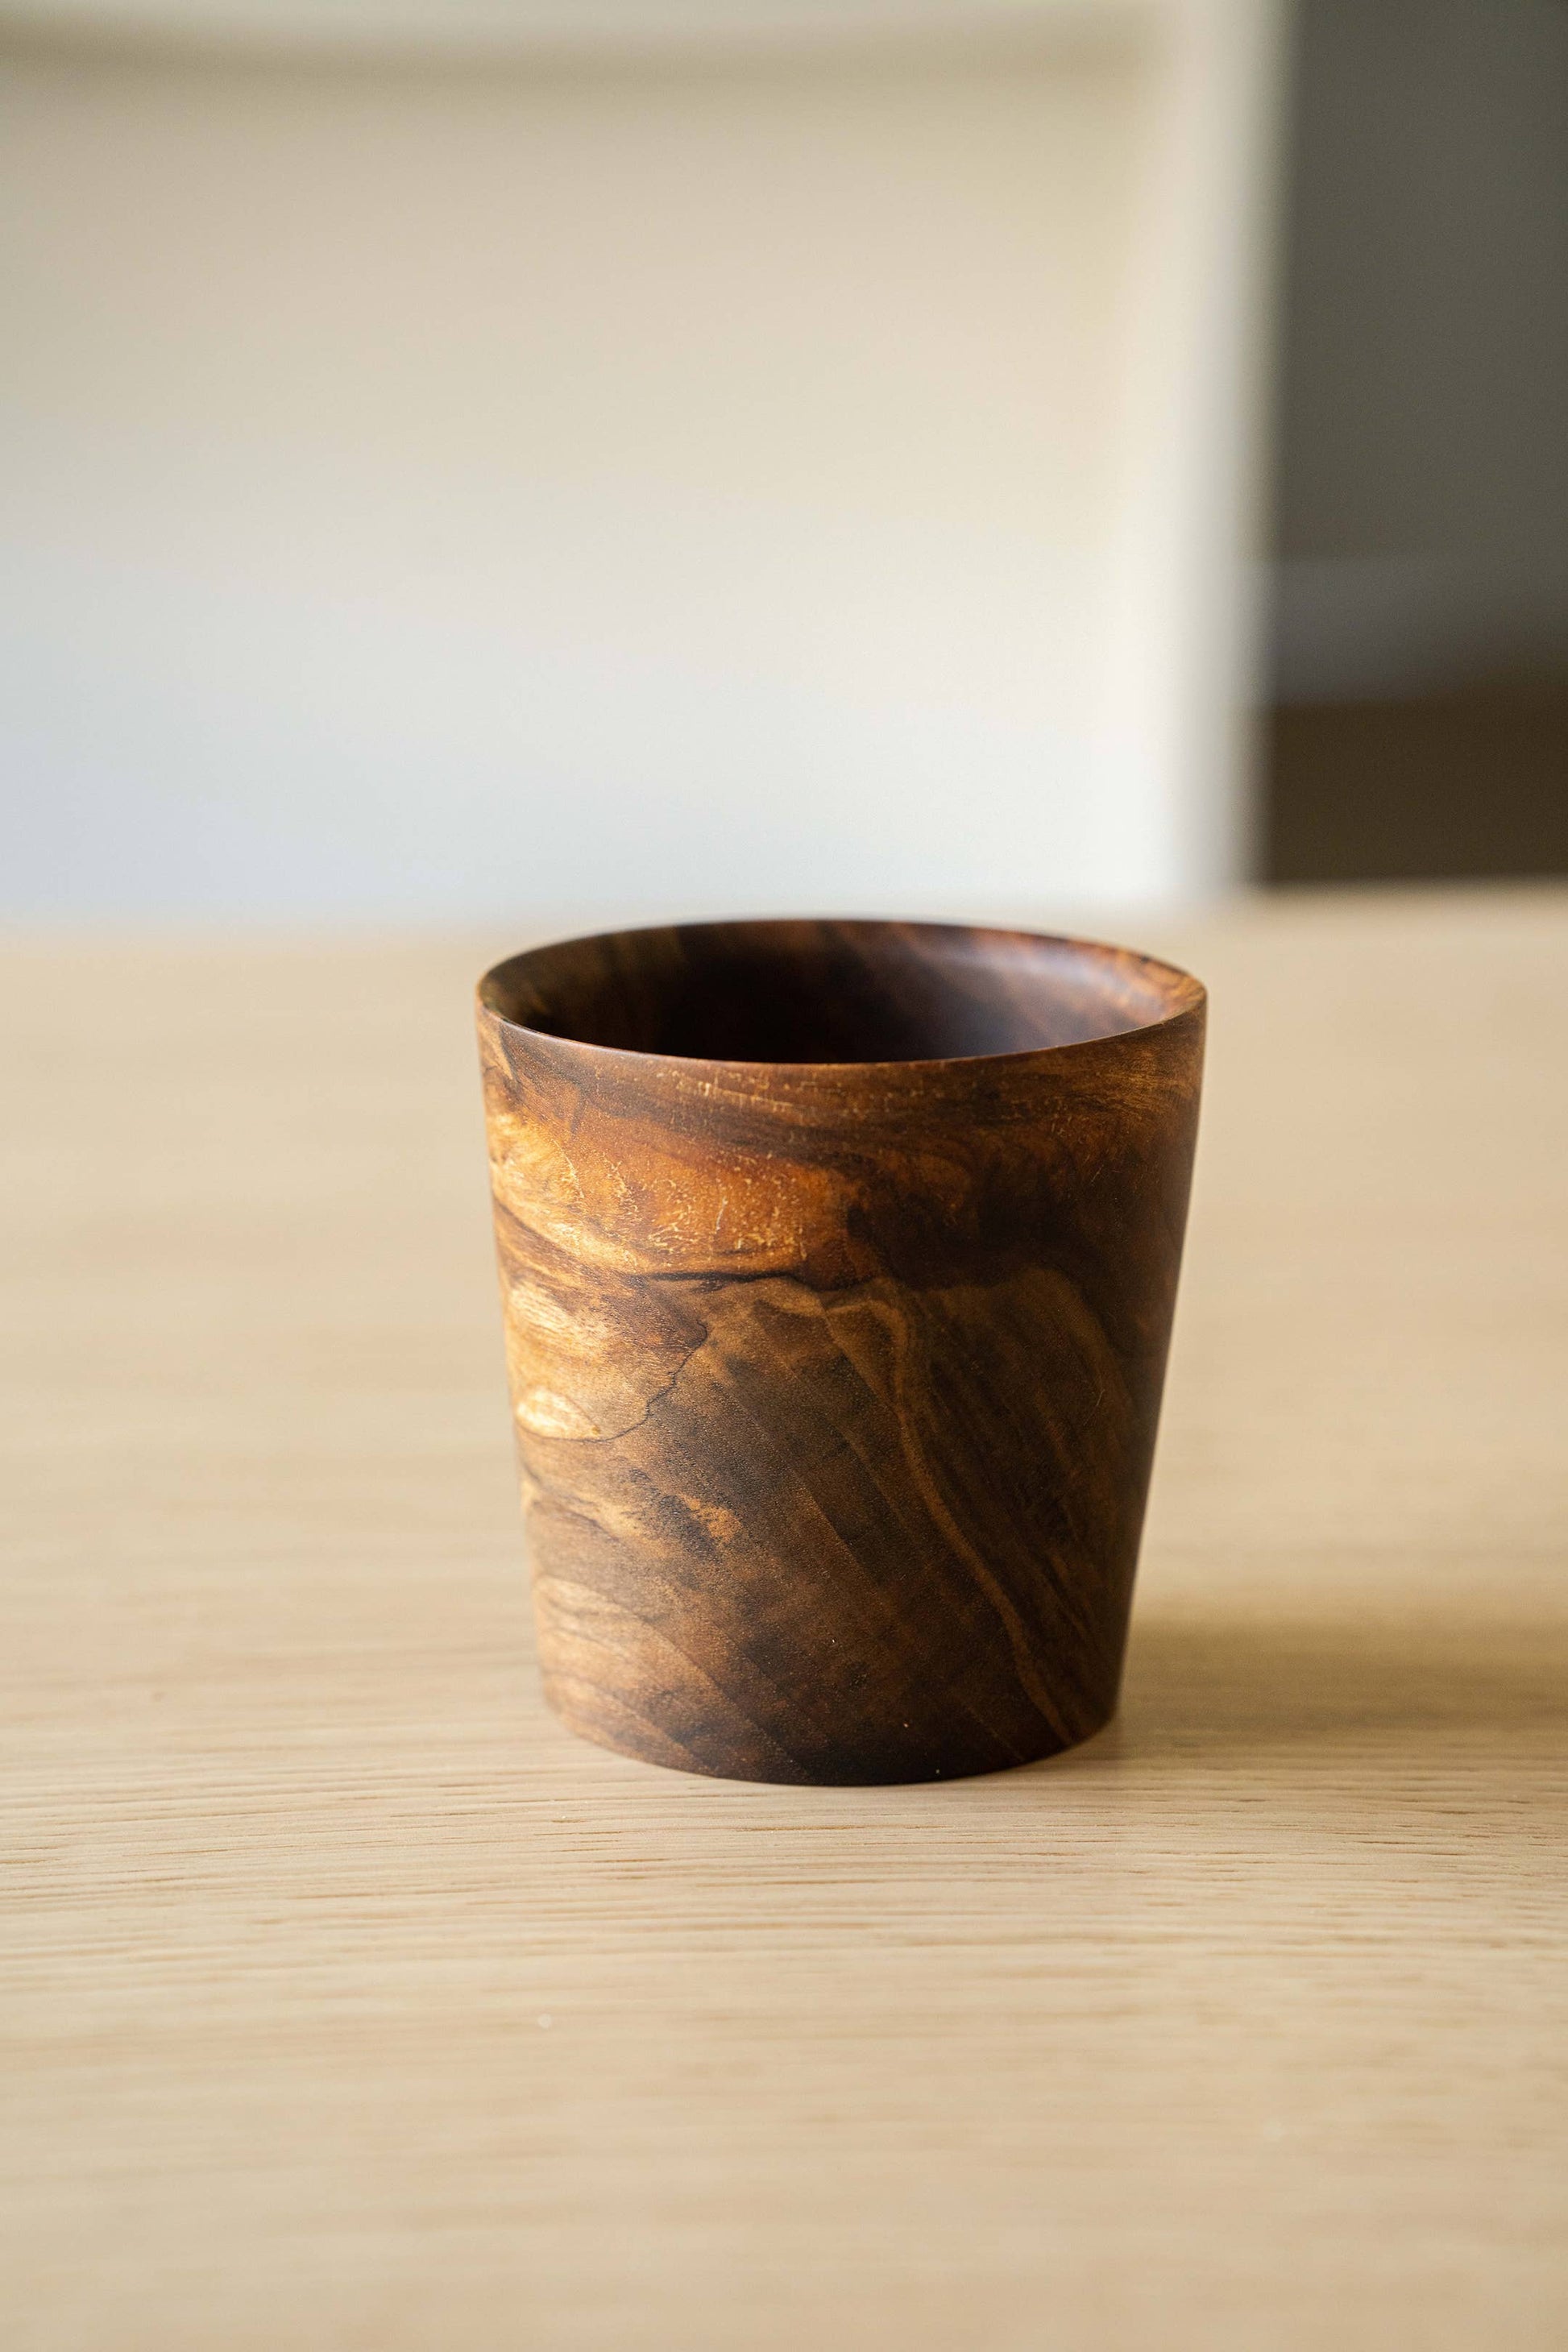 Ethical Trade Co Tabletop Hand-Carved Ukrainian Walnut Wood Coffee Cups